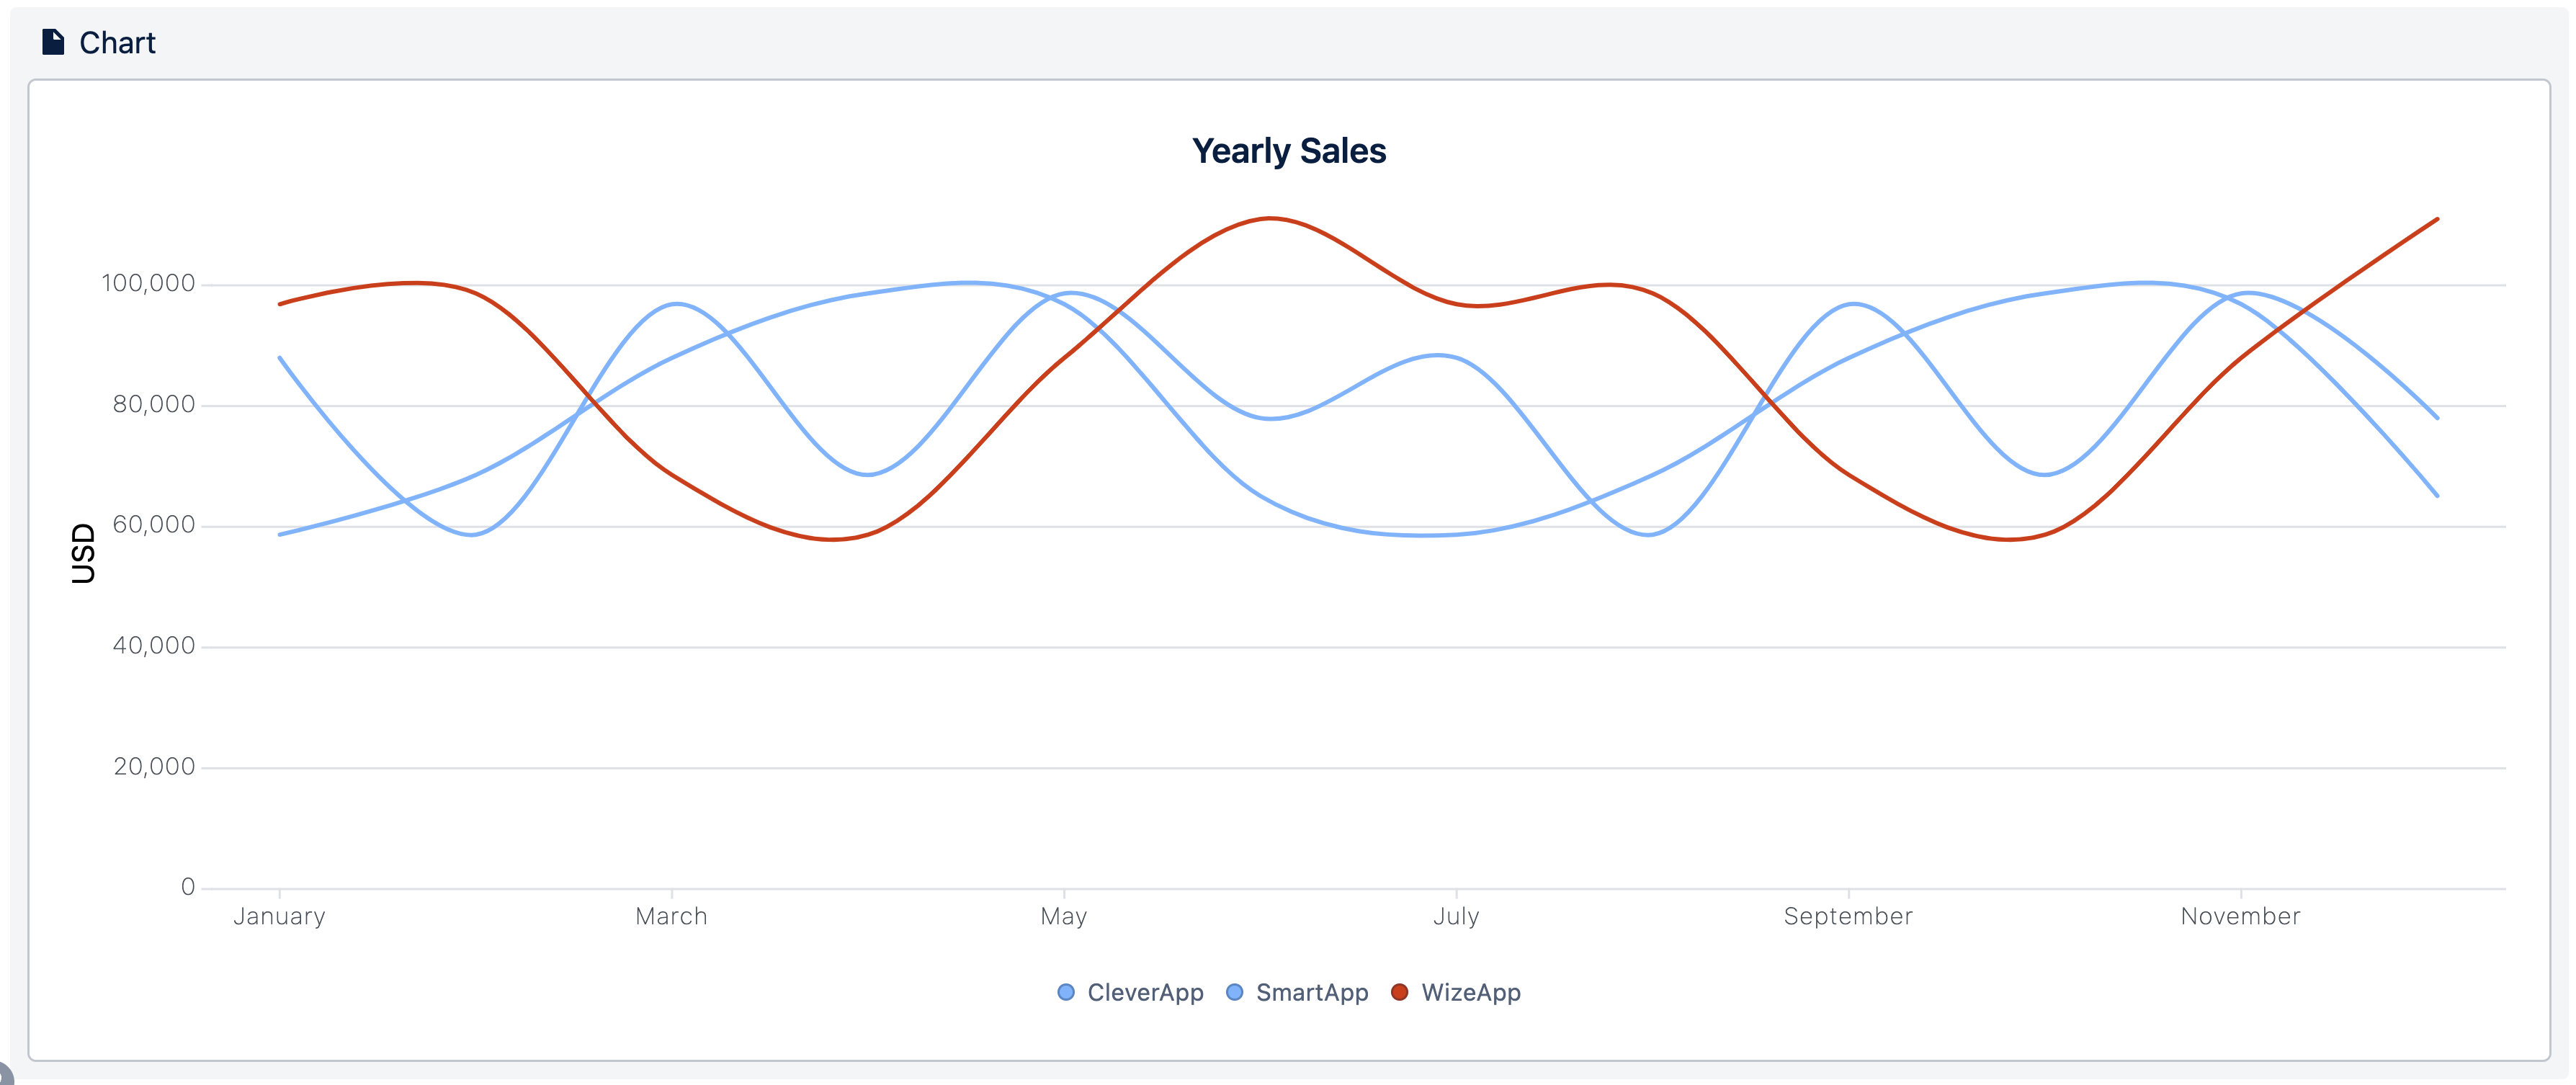 A line chart comparing the yearly sales of three apps